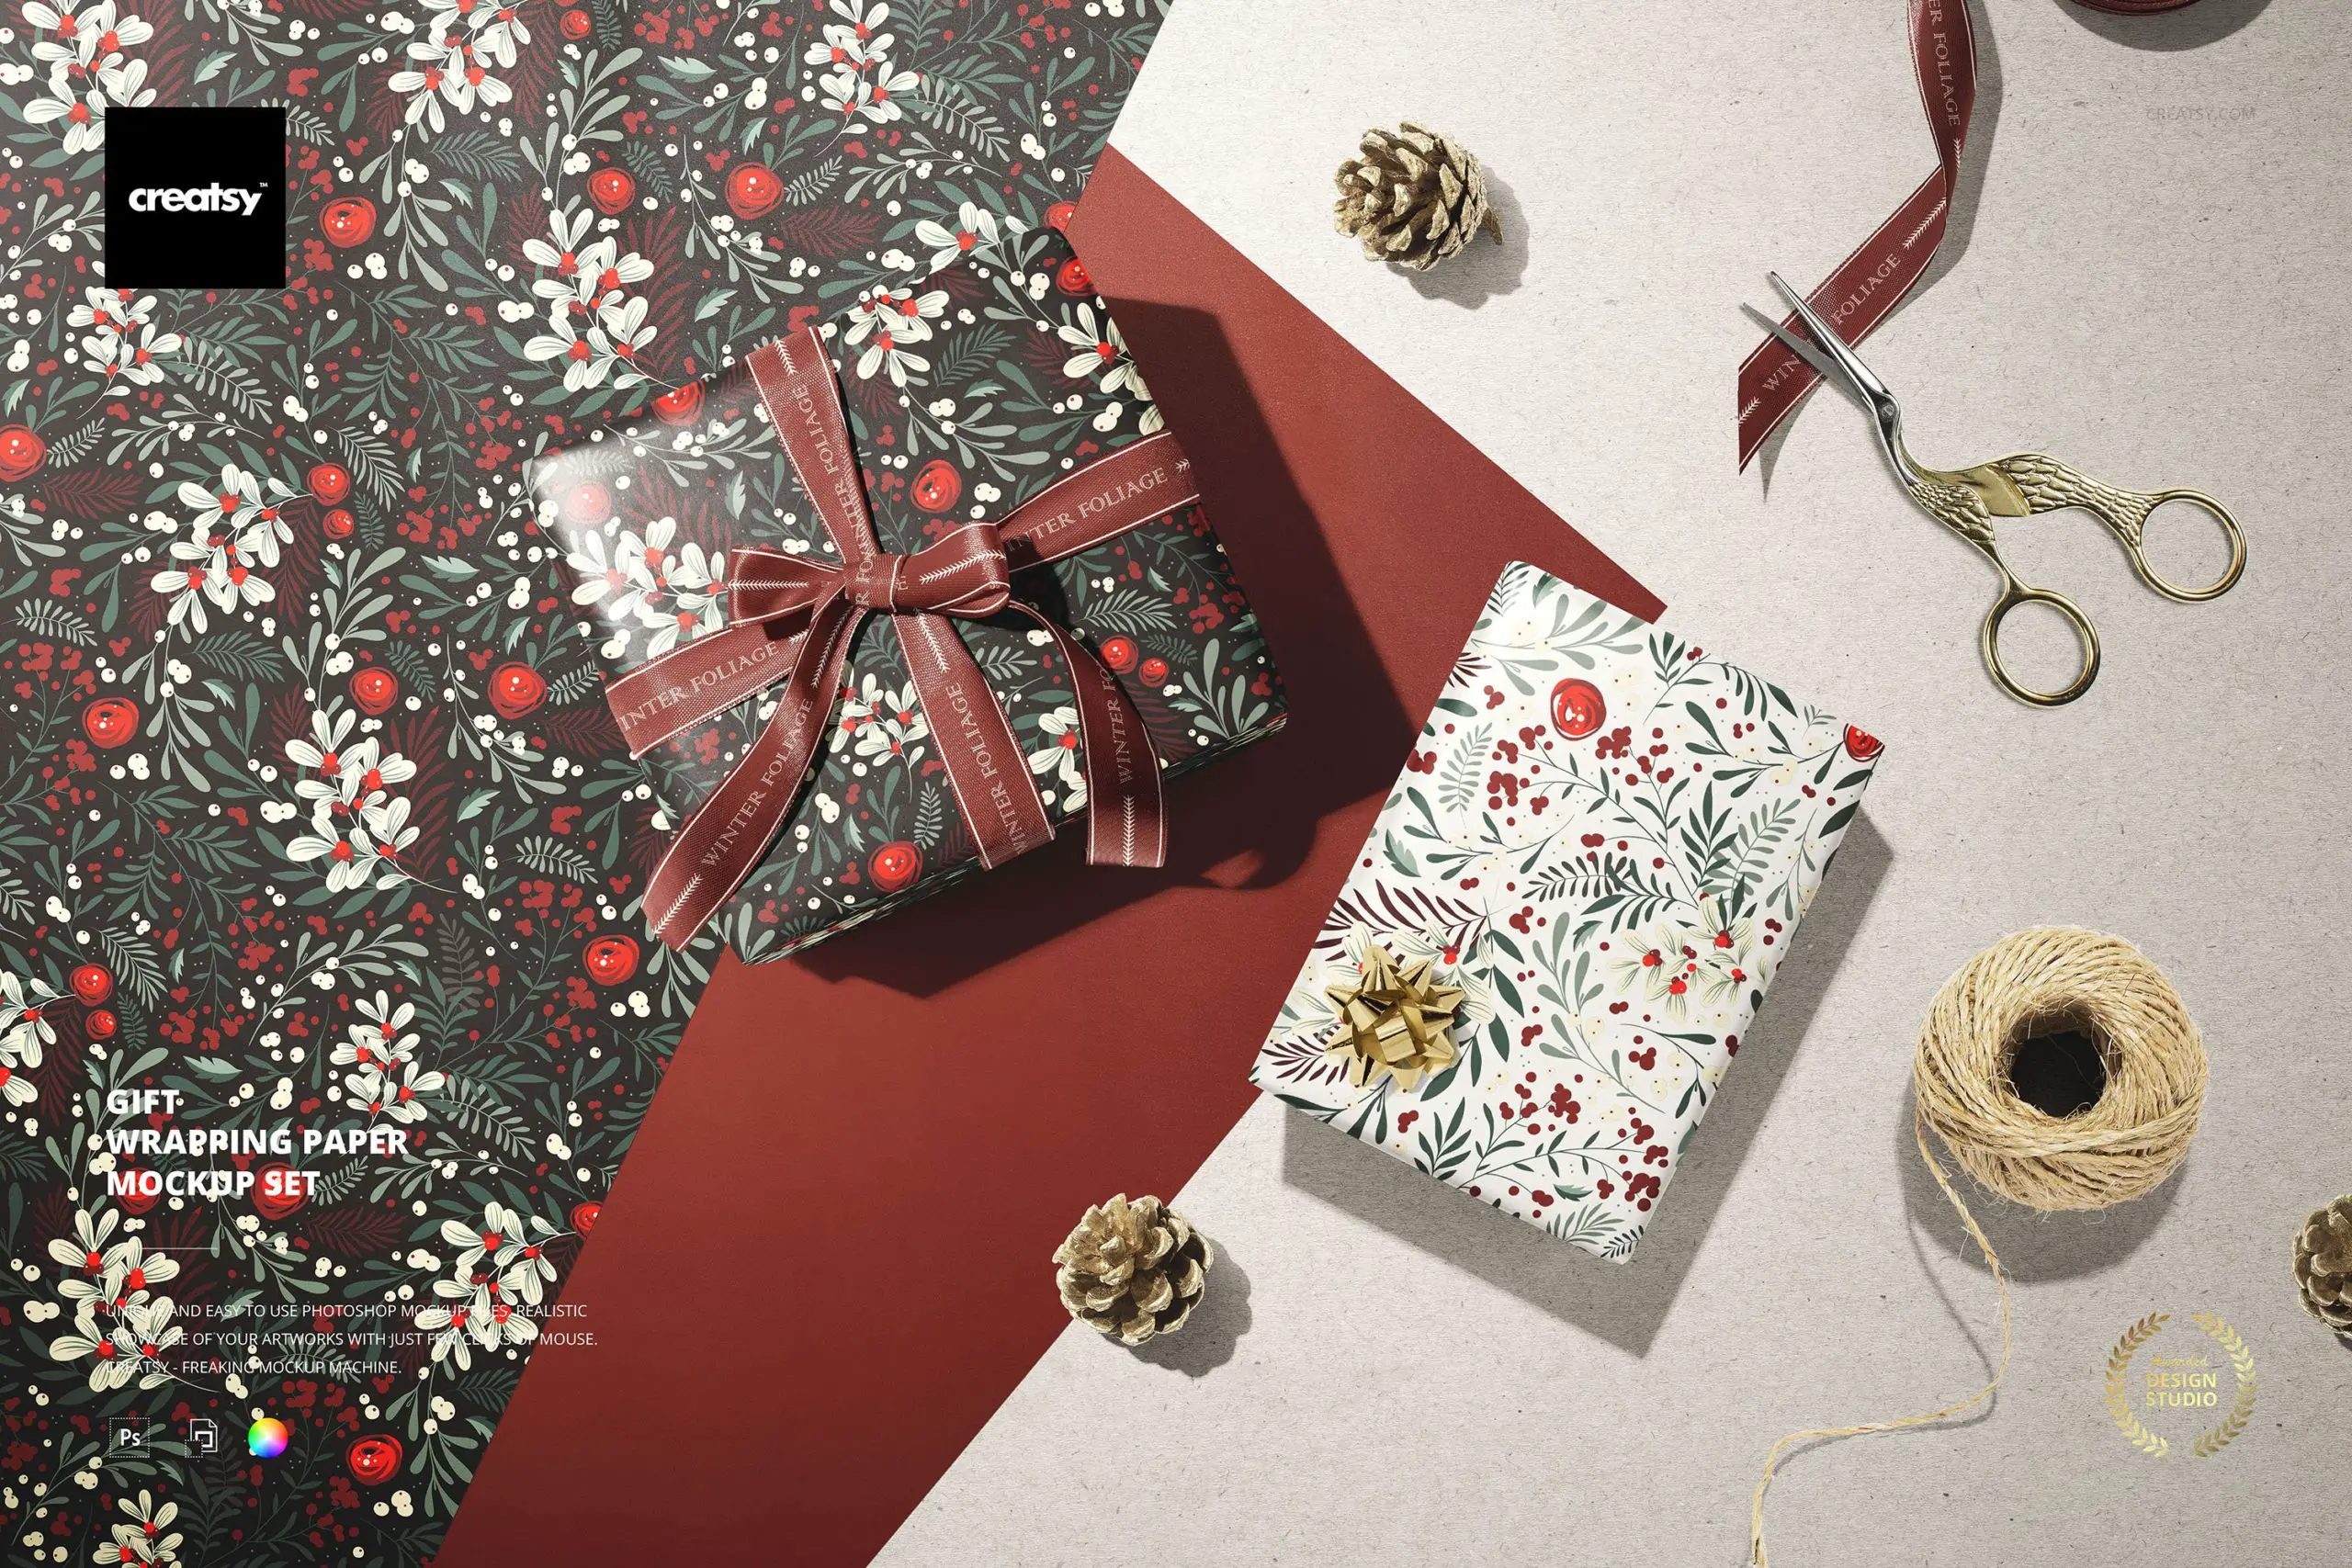 Wrapping Paper Mockup Set - 